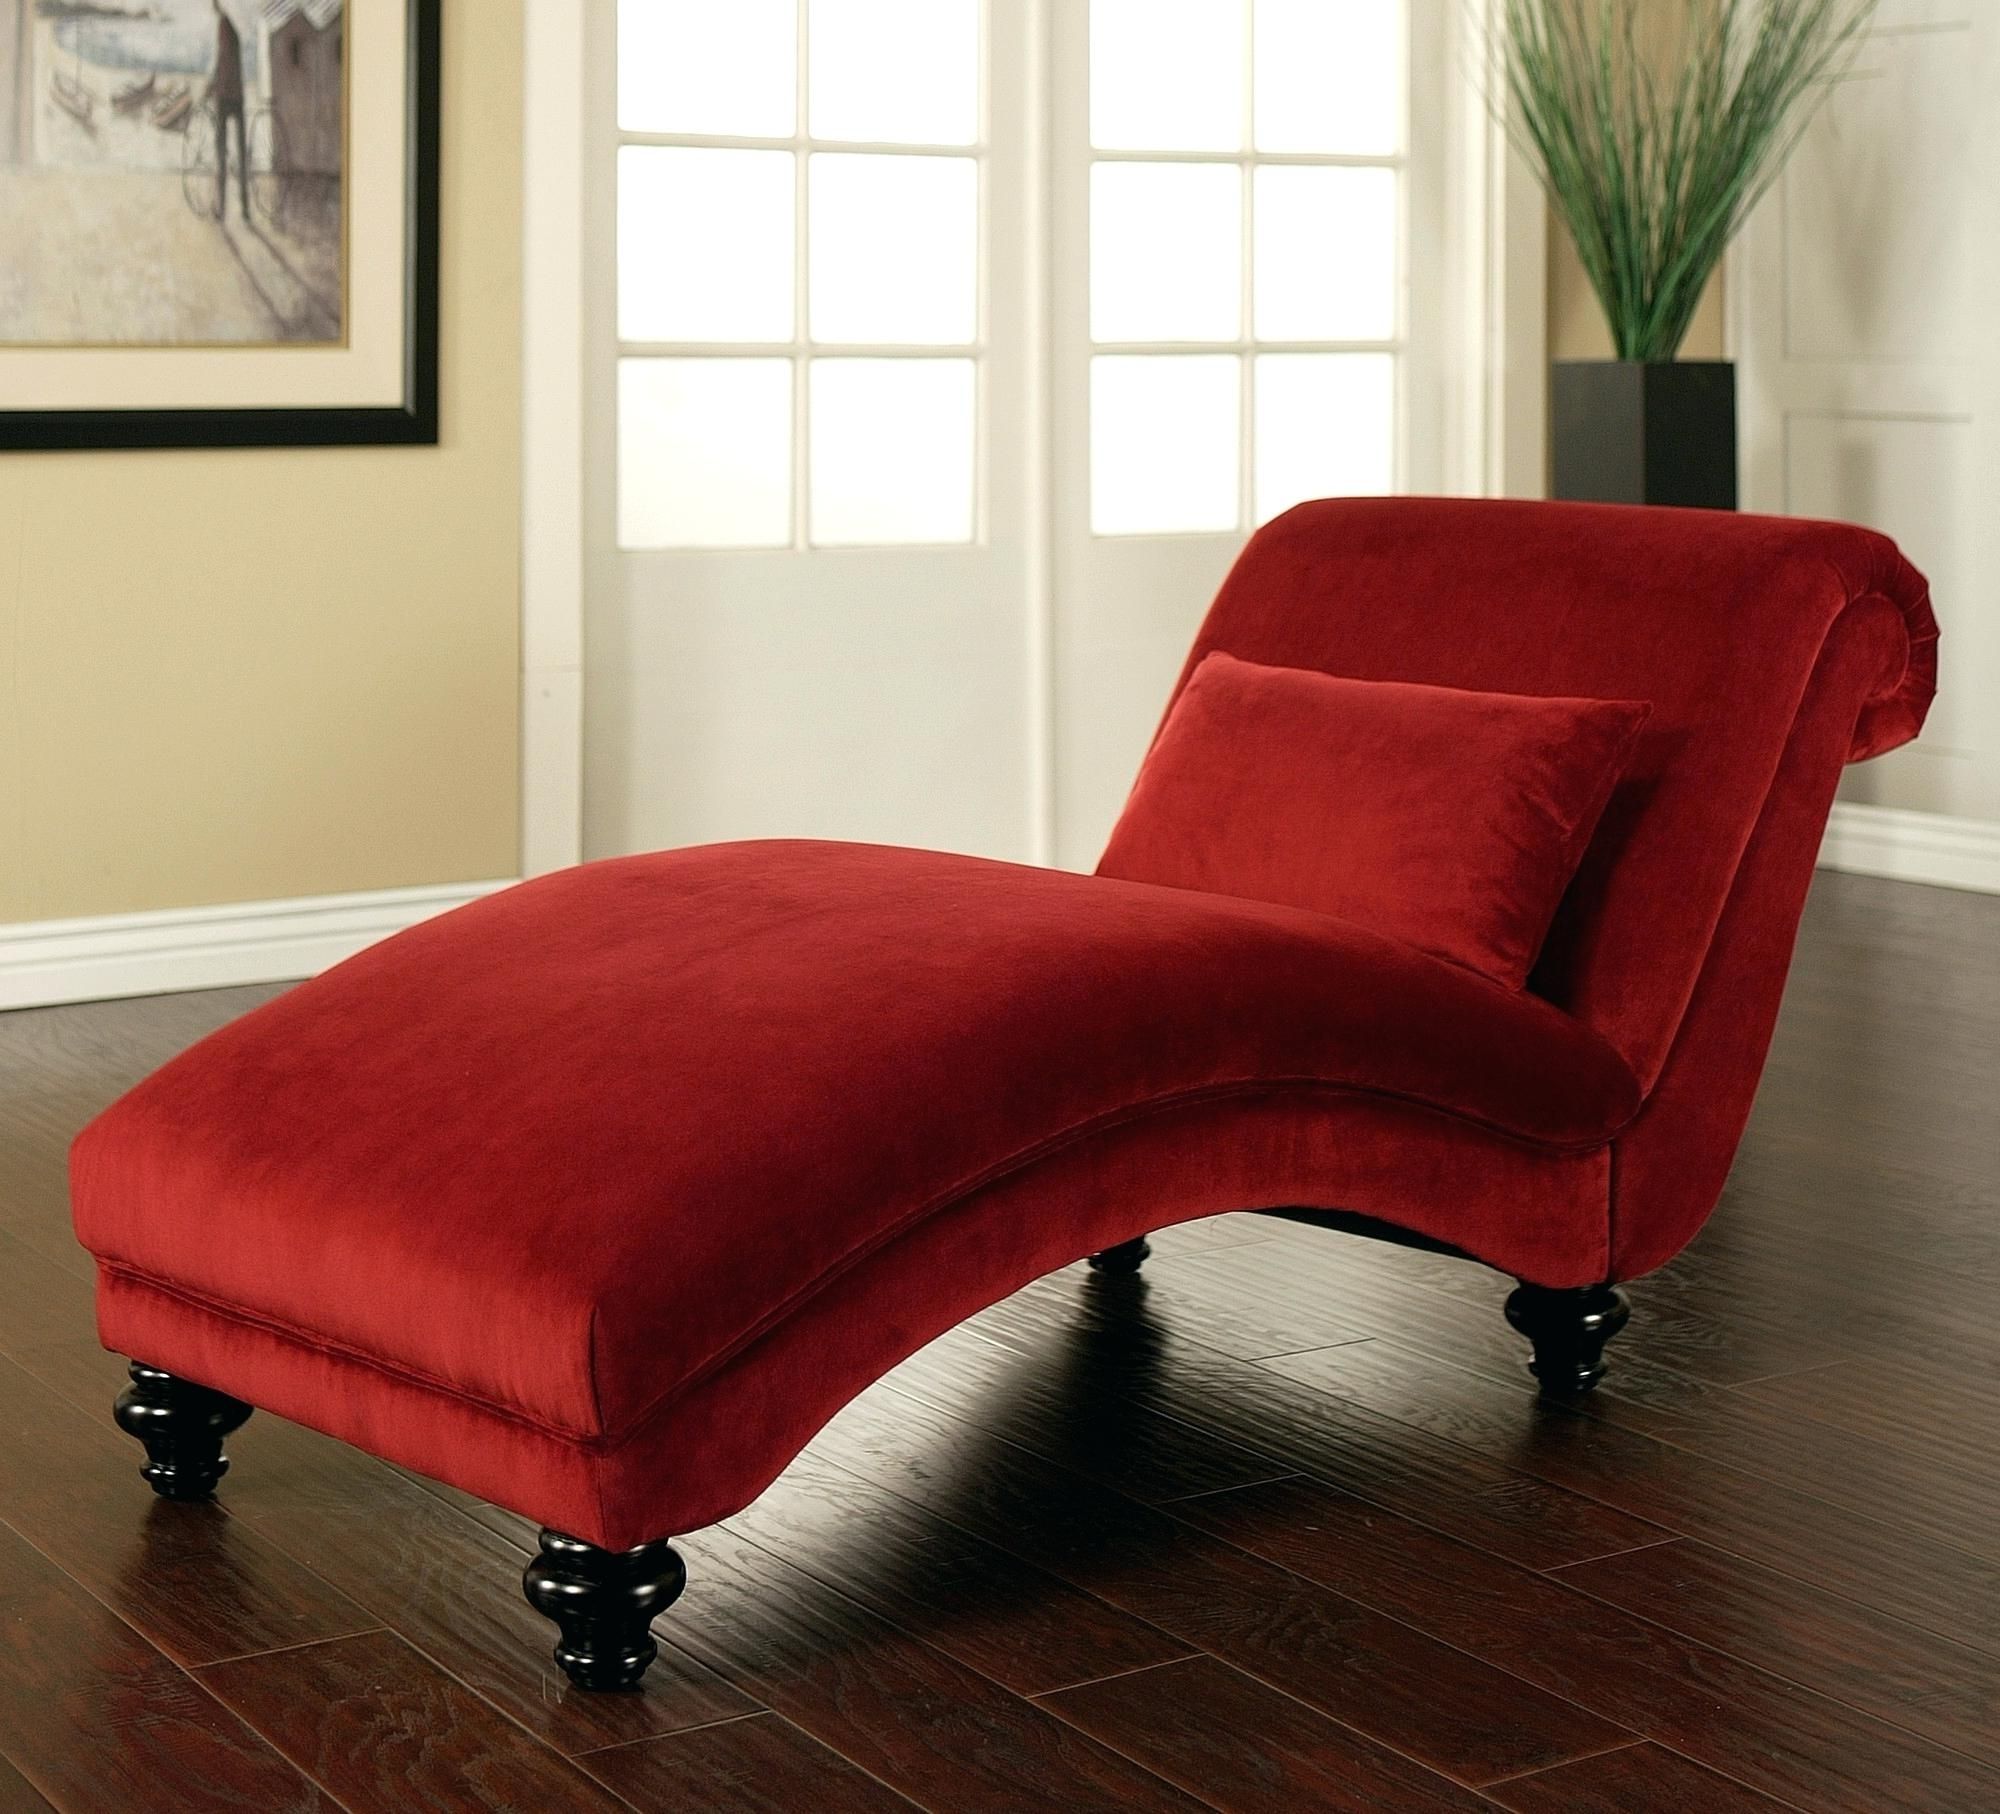 Popular Best Ideas Of Chaise Lounge Red On Chaise Lounges Minimalist With Curved Chaises (View 11 of 15)